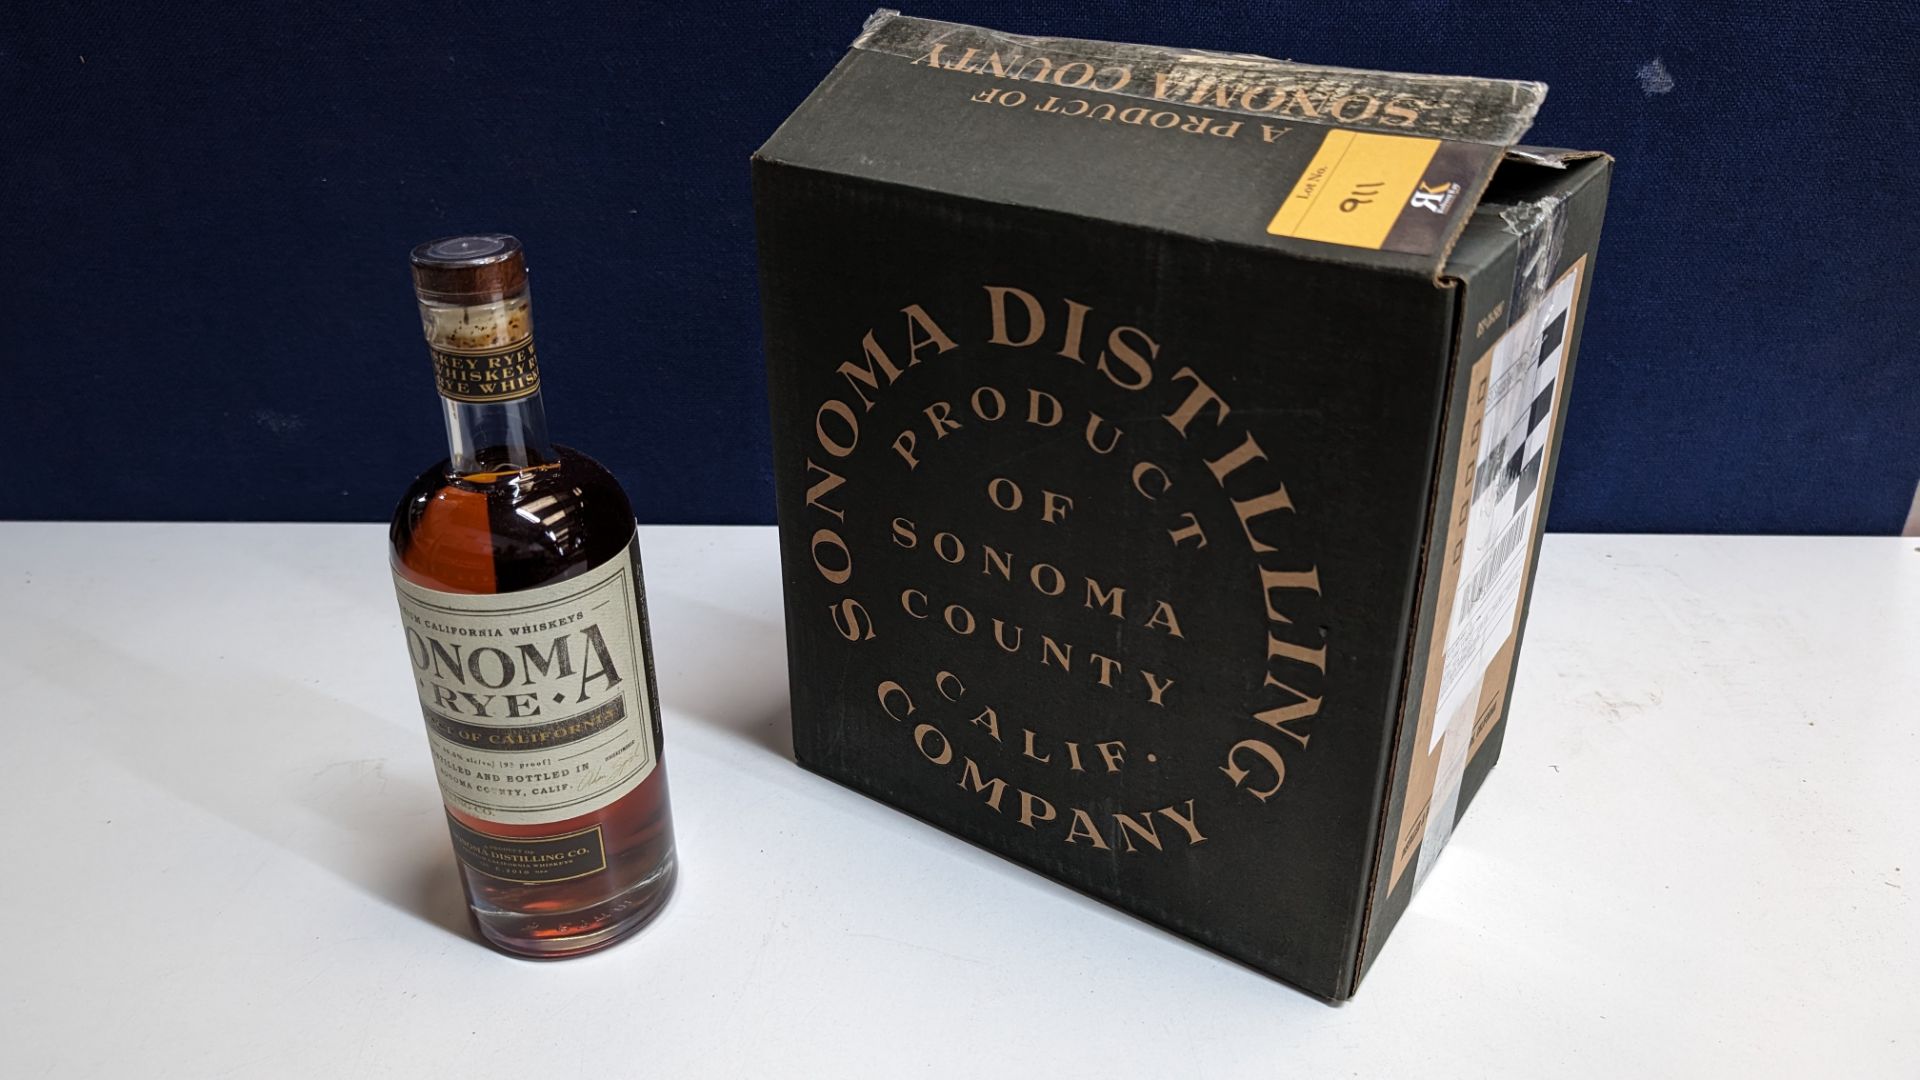 6 off 700ml bottles of Sonoma Rye Whiskey. In Sonoma branded box which includes bottling details on